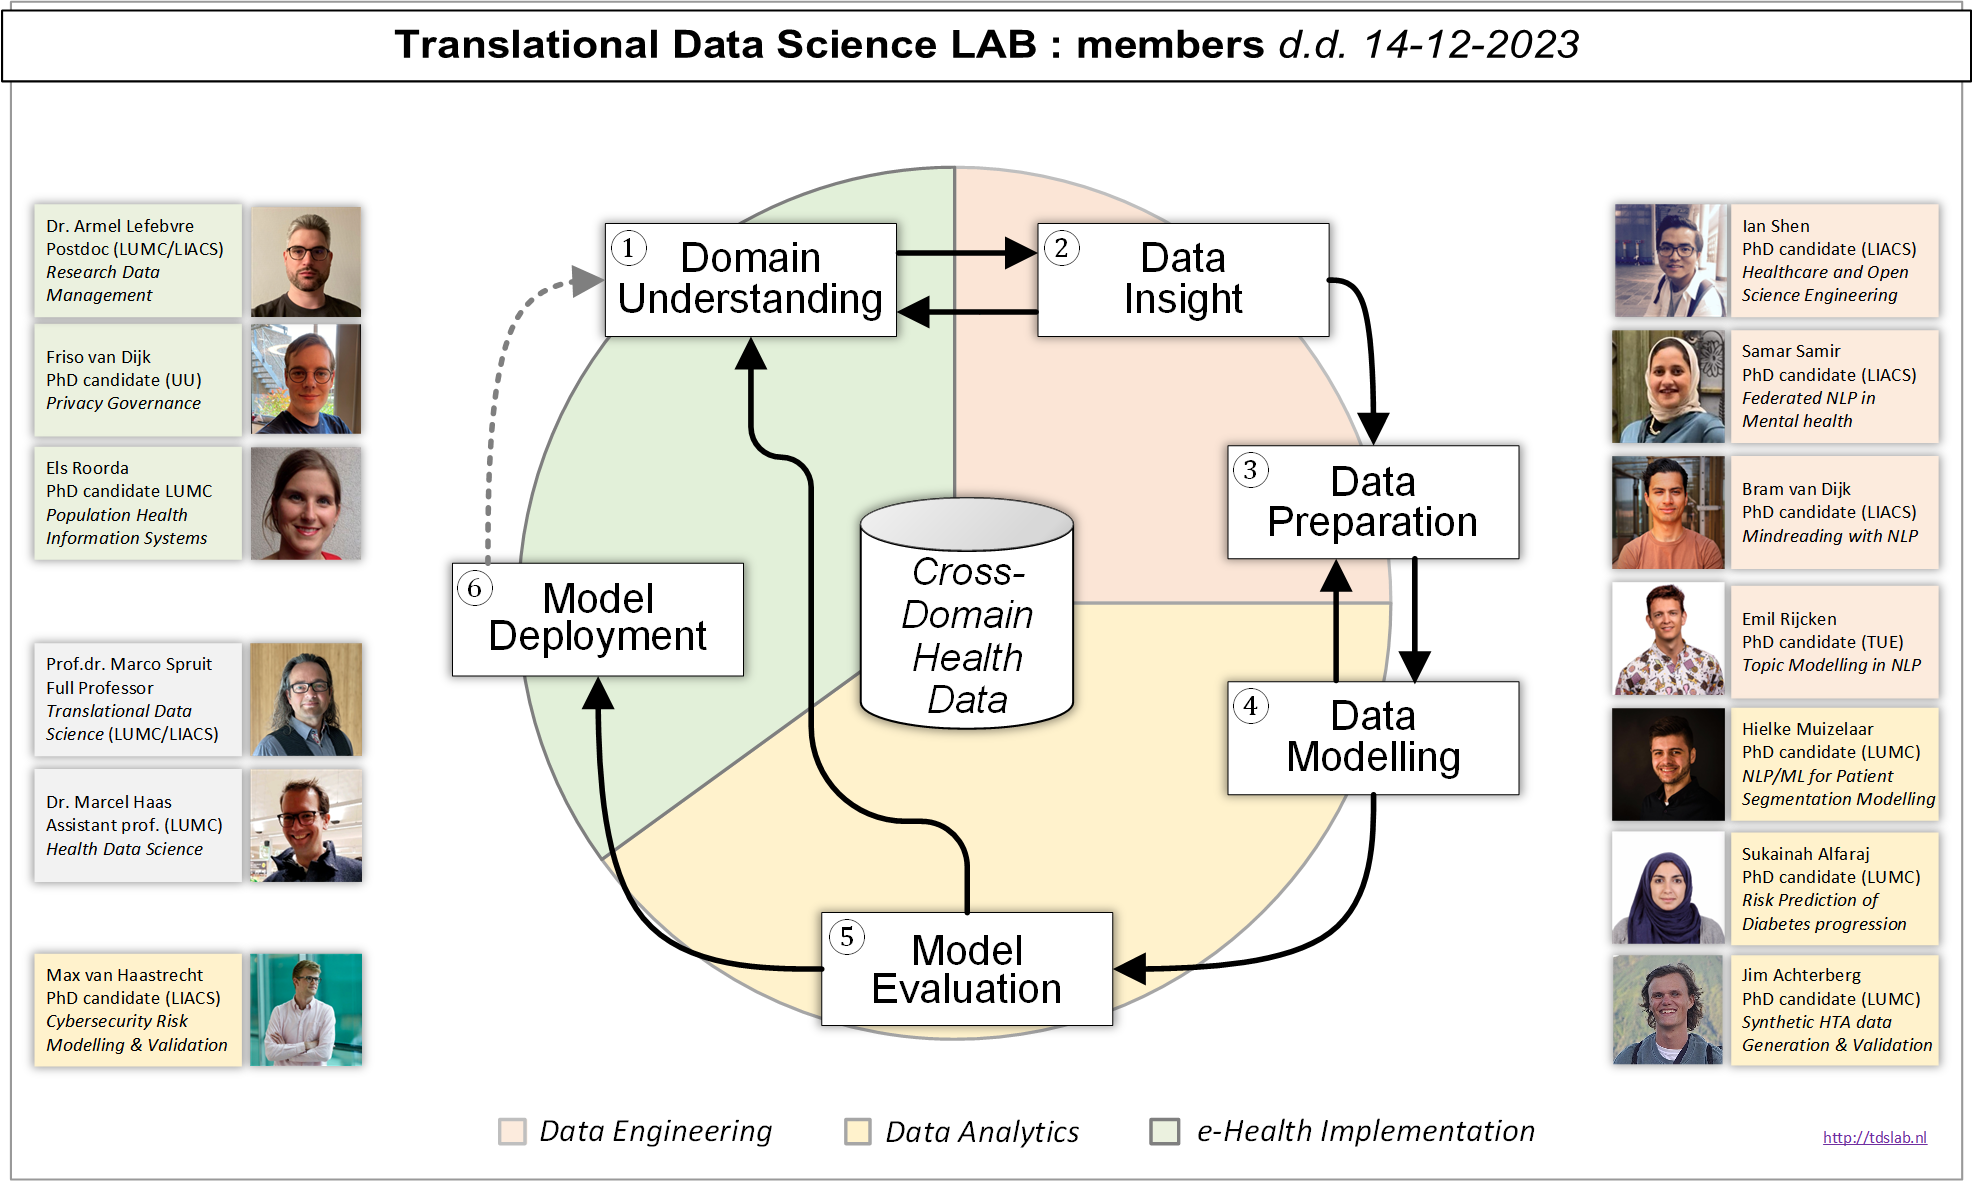 TDS Lab: Current members